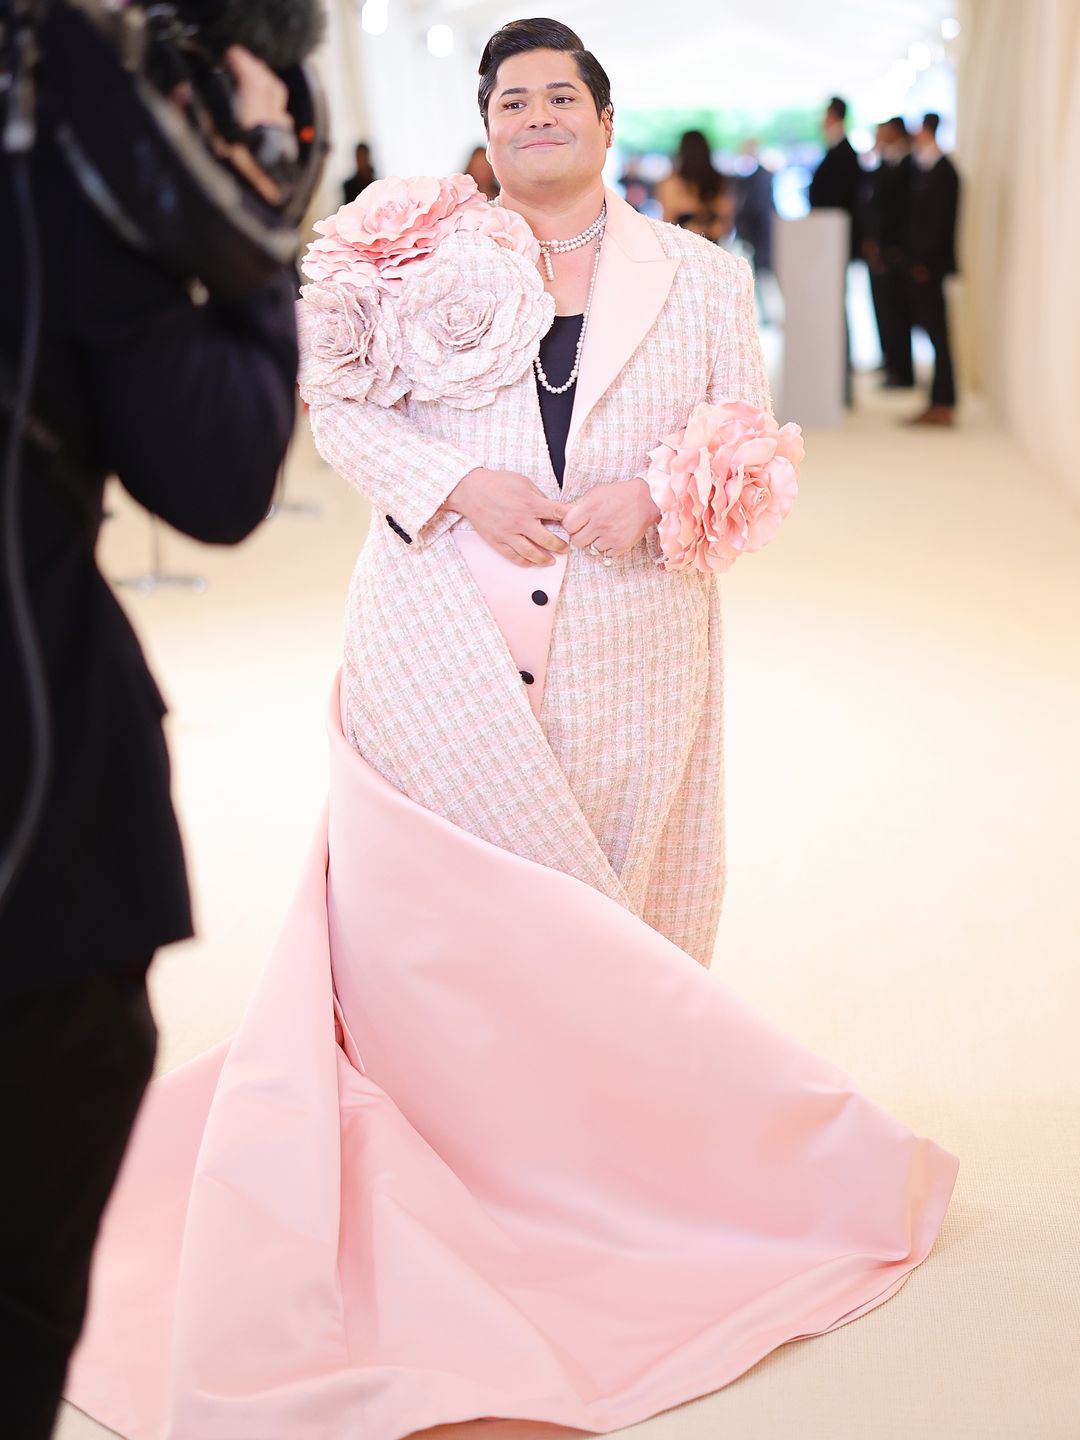 The actor attending the 2023 Met Gala in a long pink light gown